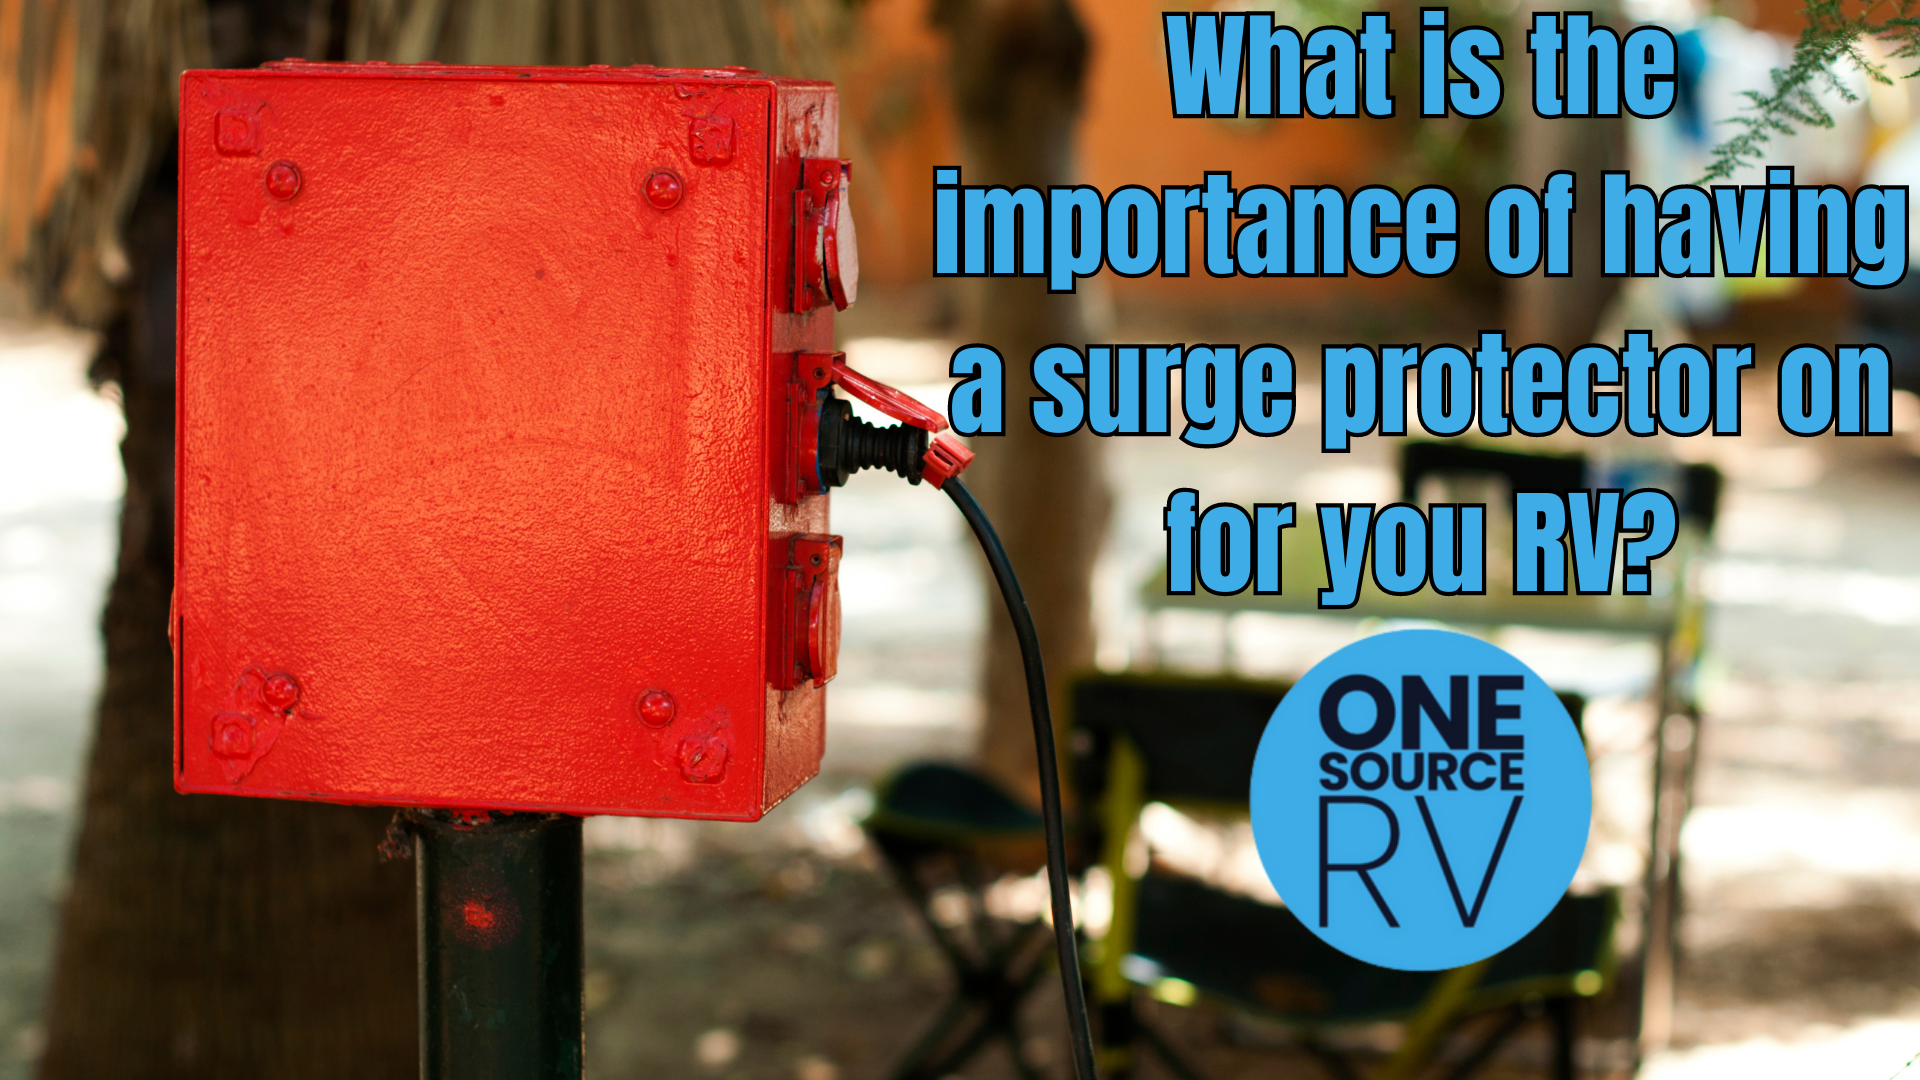 What is the importance of having a surge protector on for you RV?